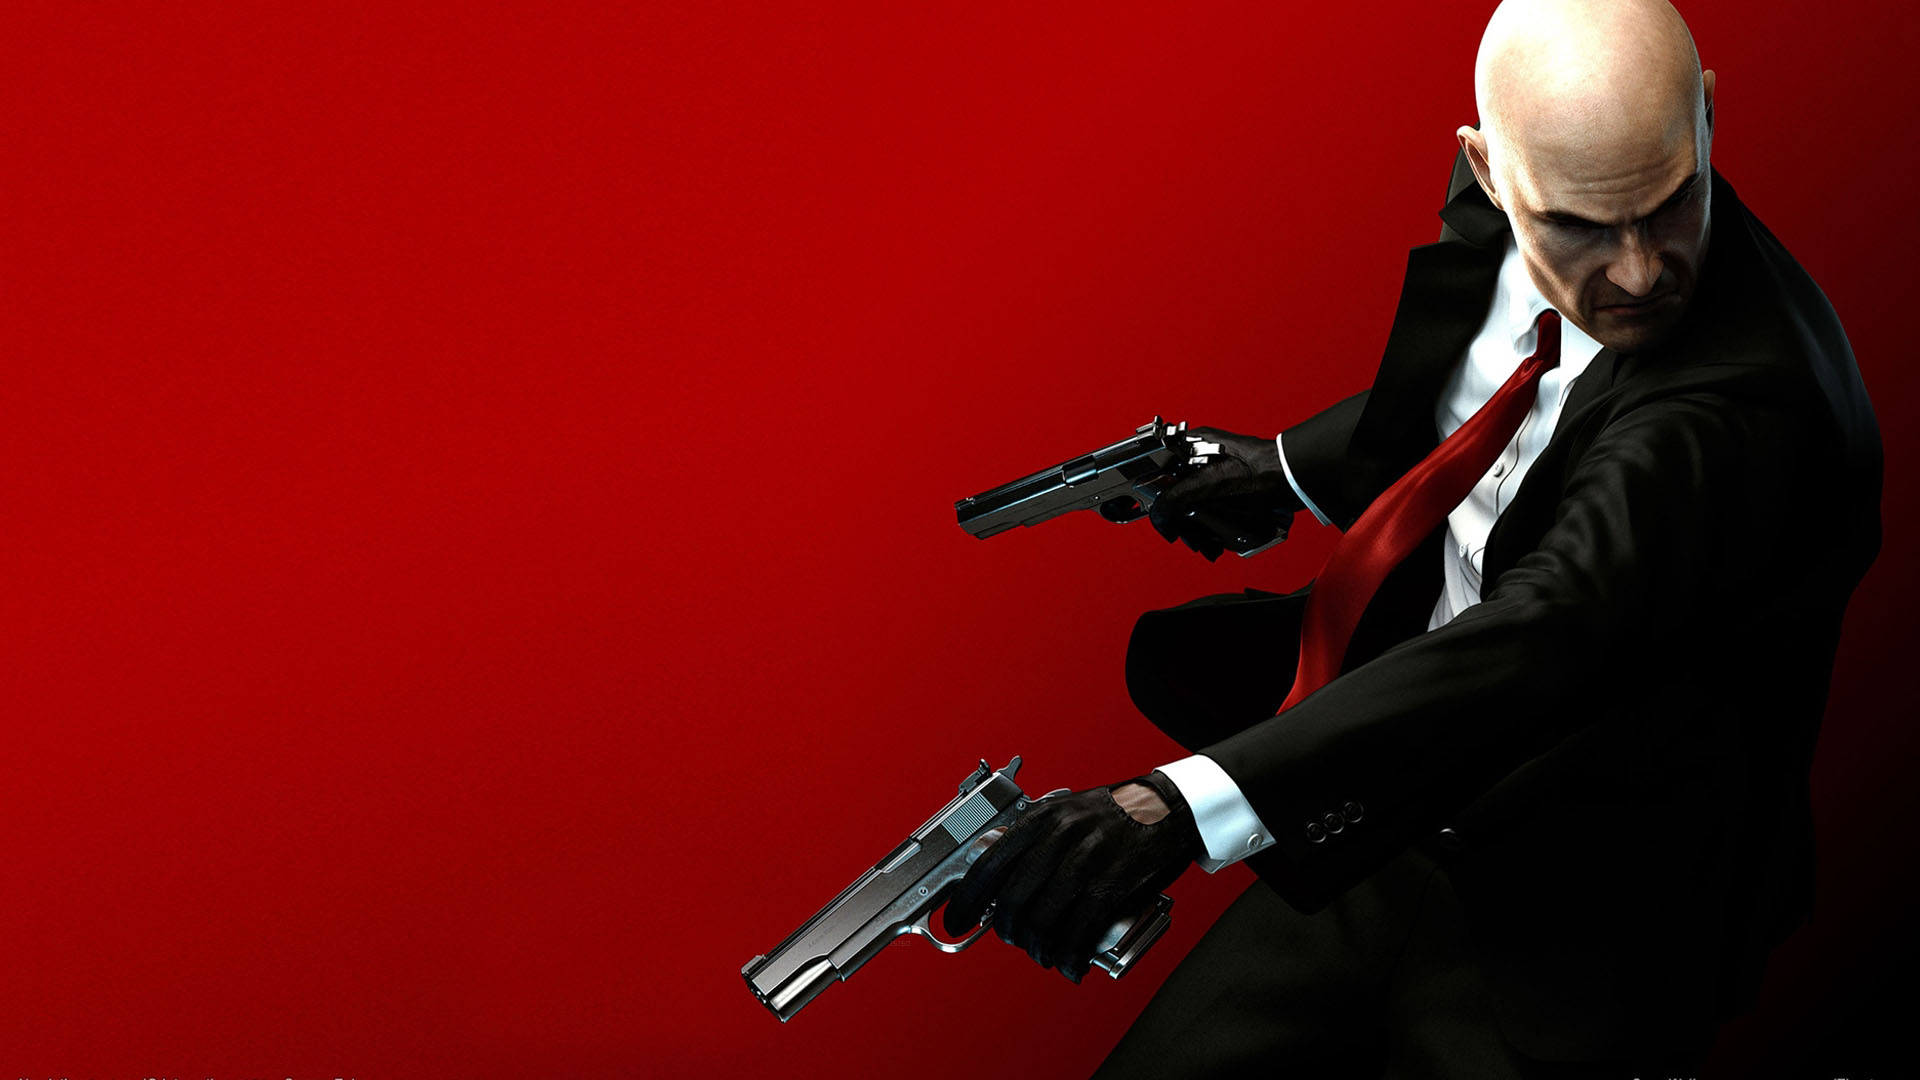  Hitman  Absolution HD Wallpaper Background Image  1920x1080 